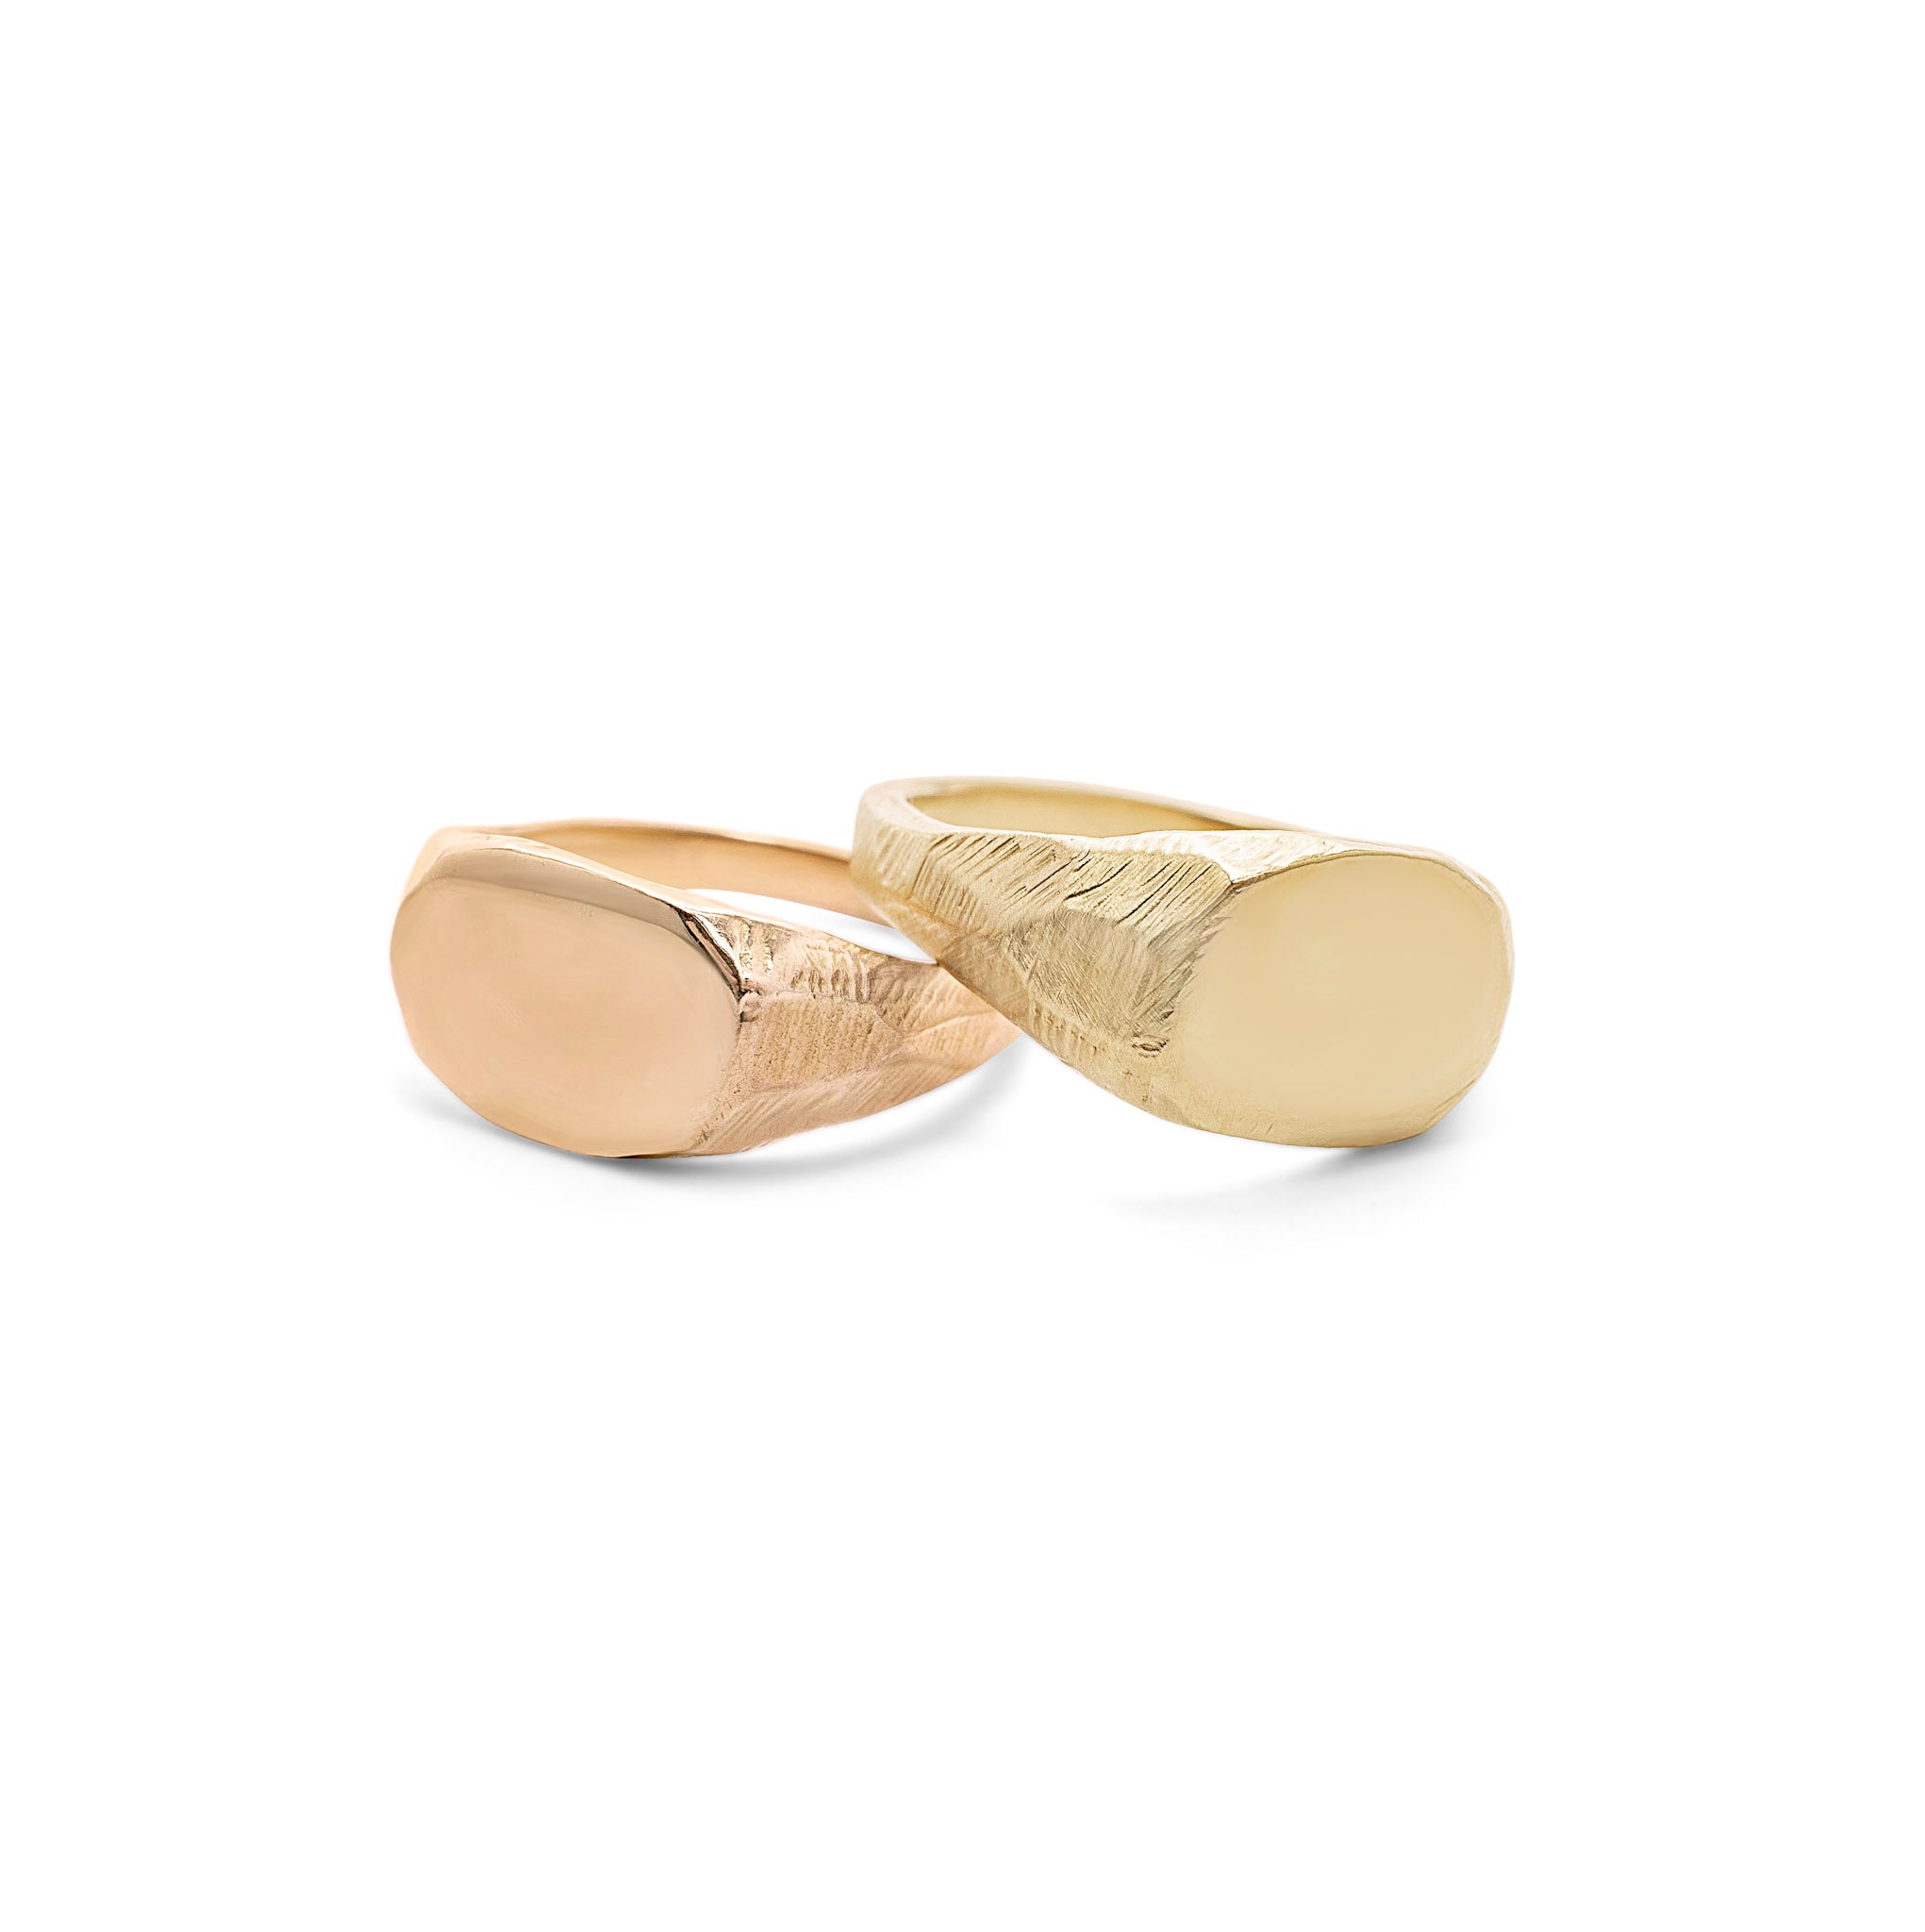 Handmade petite carved signet ring in 18kt yellow gold and 18kt rose gold